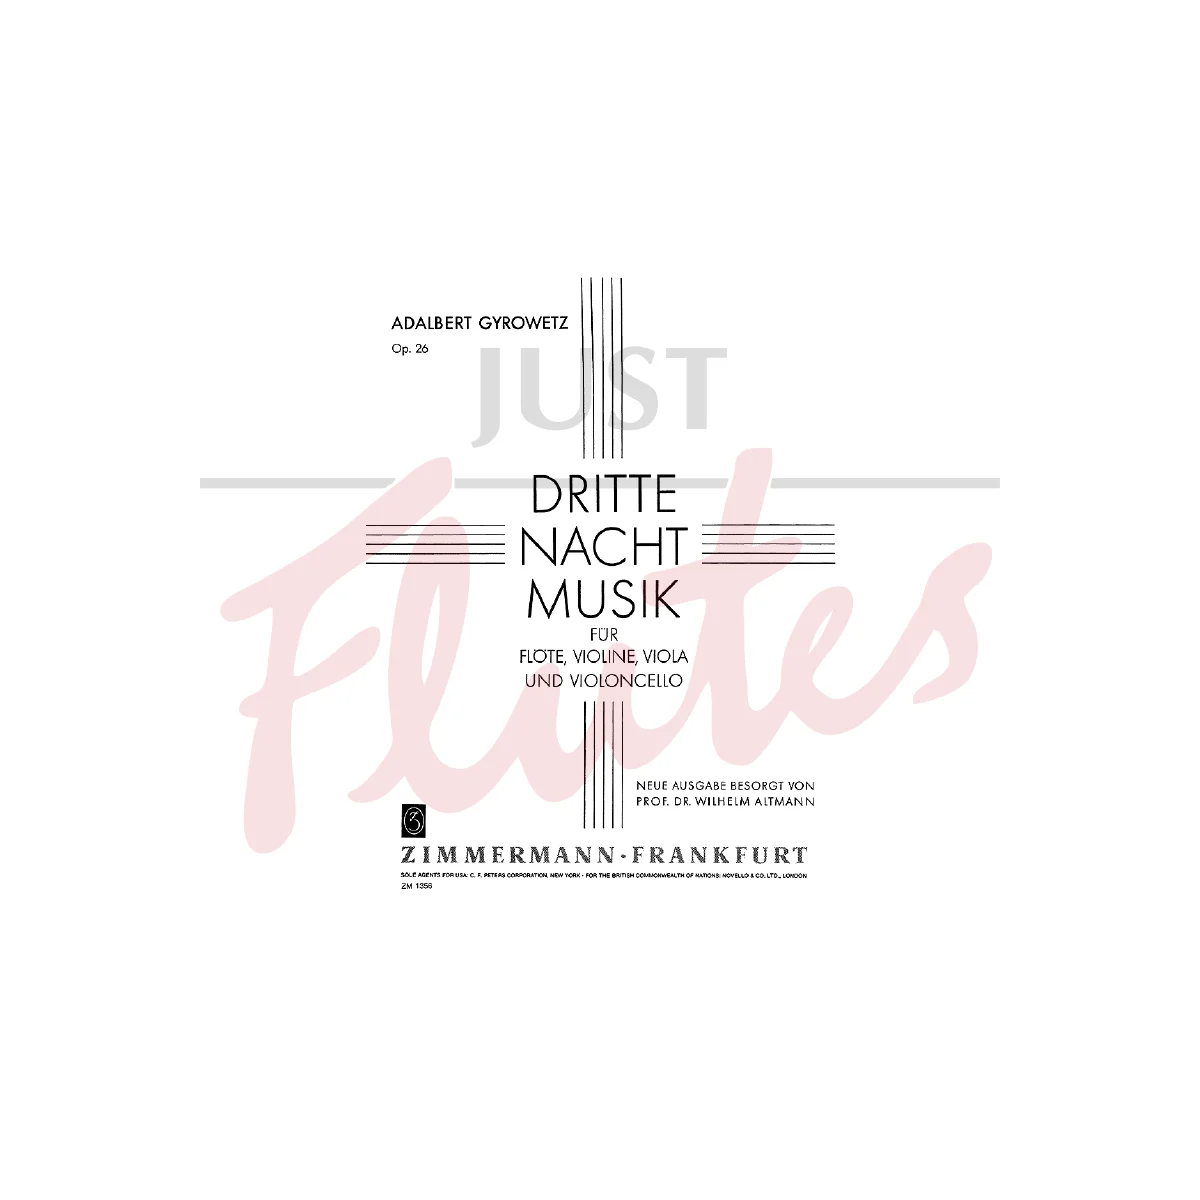 Third Nocturnal Music for Flute, Violin, Viola and Cello